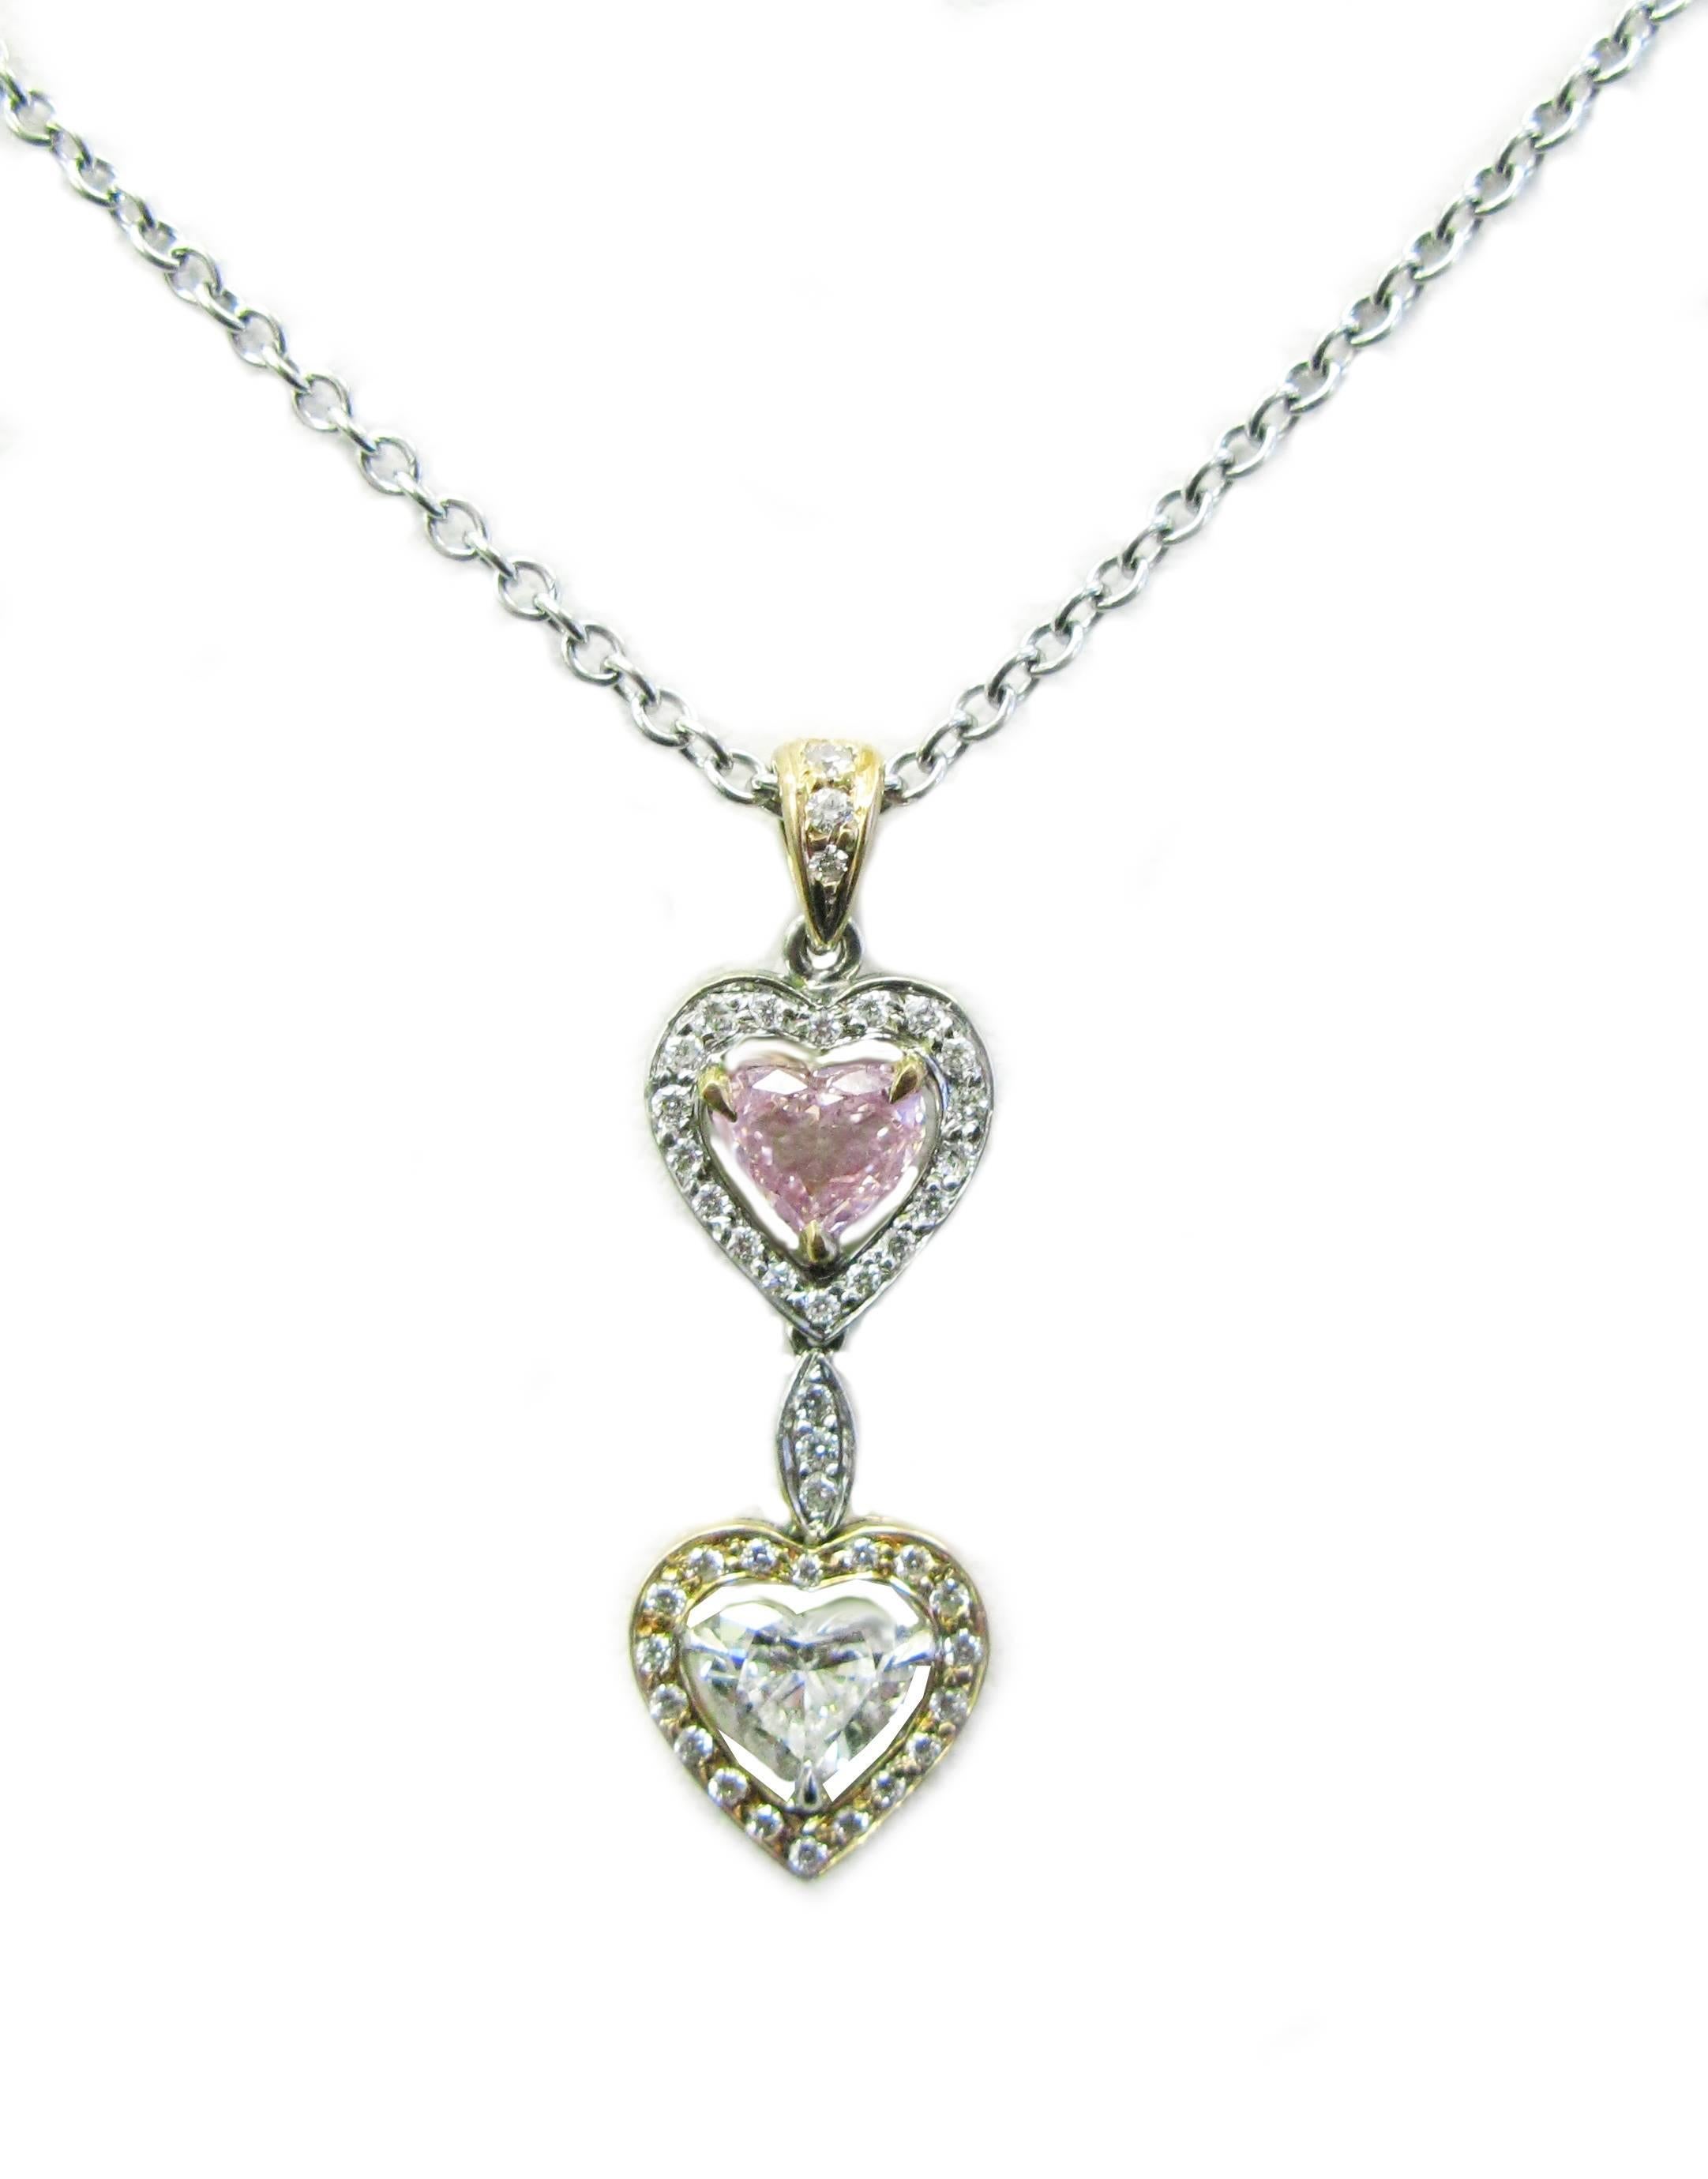 This beautiful 18kt two-tone gold pendant is unlike any other. It features a  GIA certified, 0.30ct, Natural Fancy Pink color, Heart shape diamond on top with a pave frame in white gold. The bottom Heart shape diamond is a 0.50ct, E/F color, VS